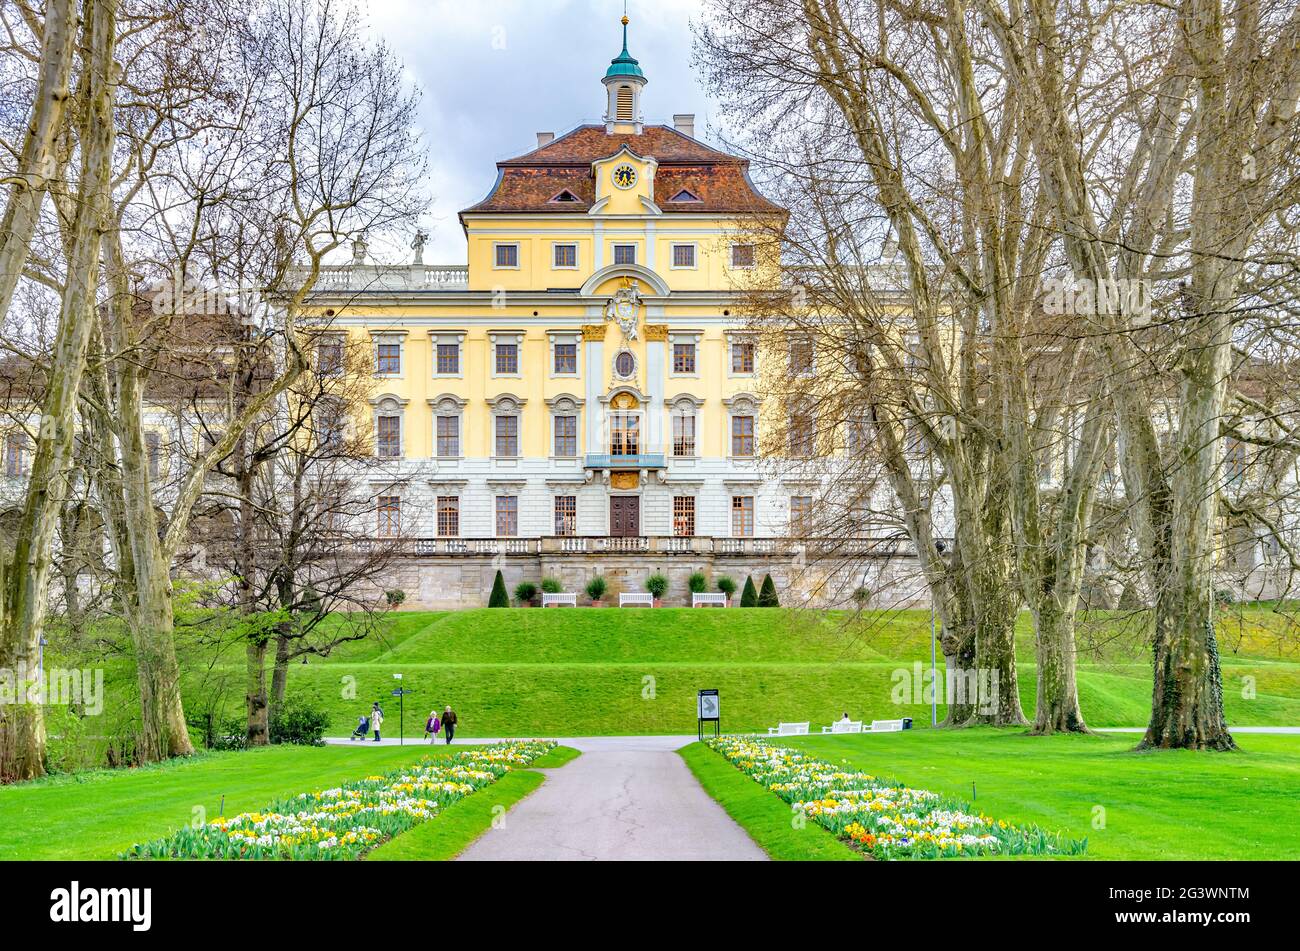 Exterior north facade of Baroque residential palace of Ludwigsburg, located near Stuttgart, Baden-Württemberg, Germany. Stock Photo